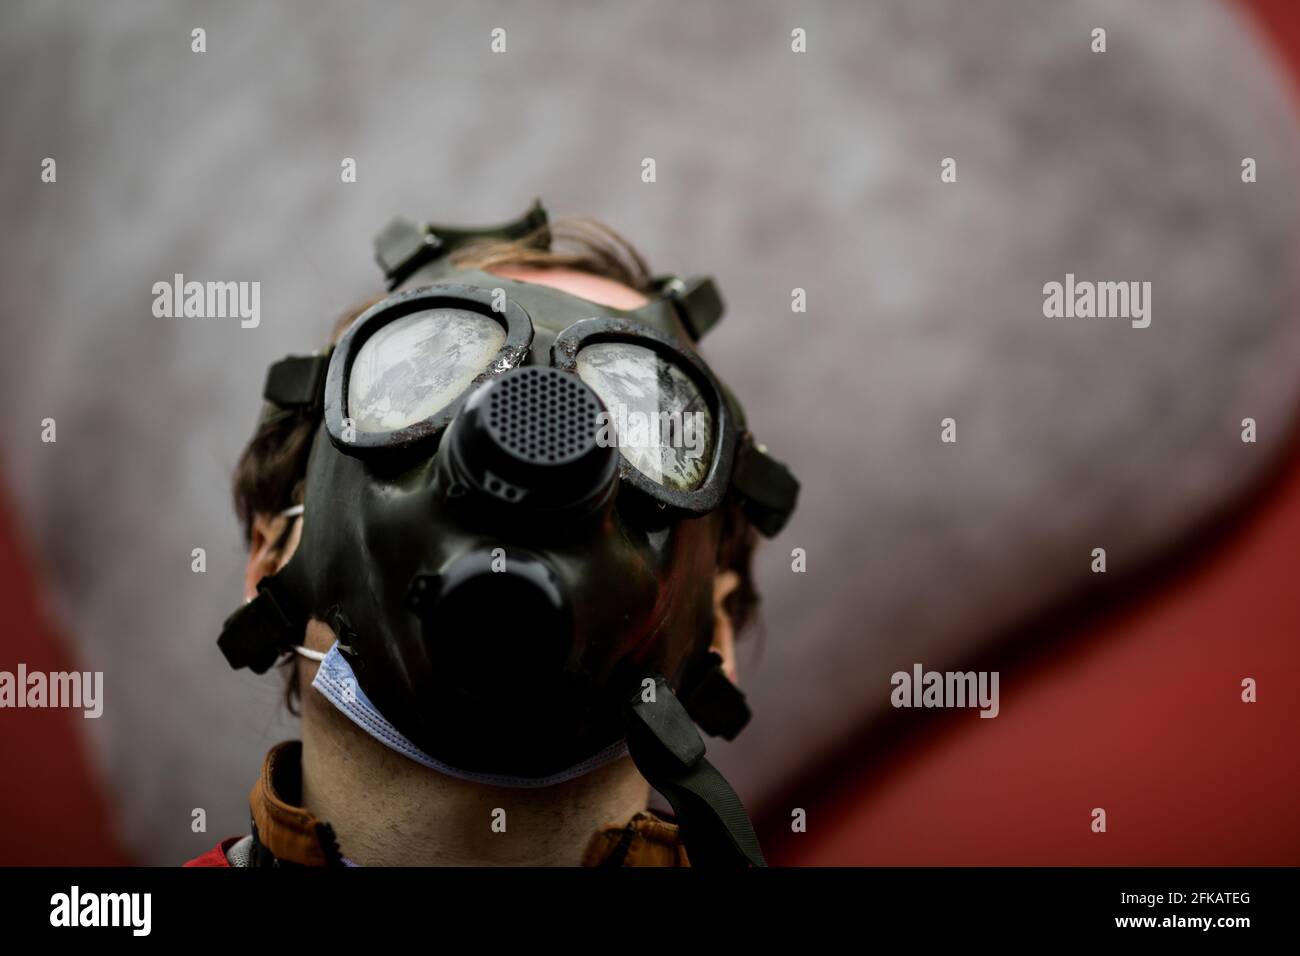 Shallow depth of field (selective focus) image with an old and worn out military gas mask without filters on the face of a man. Stock Photo